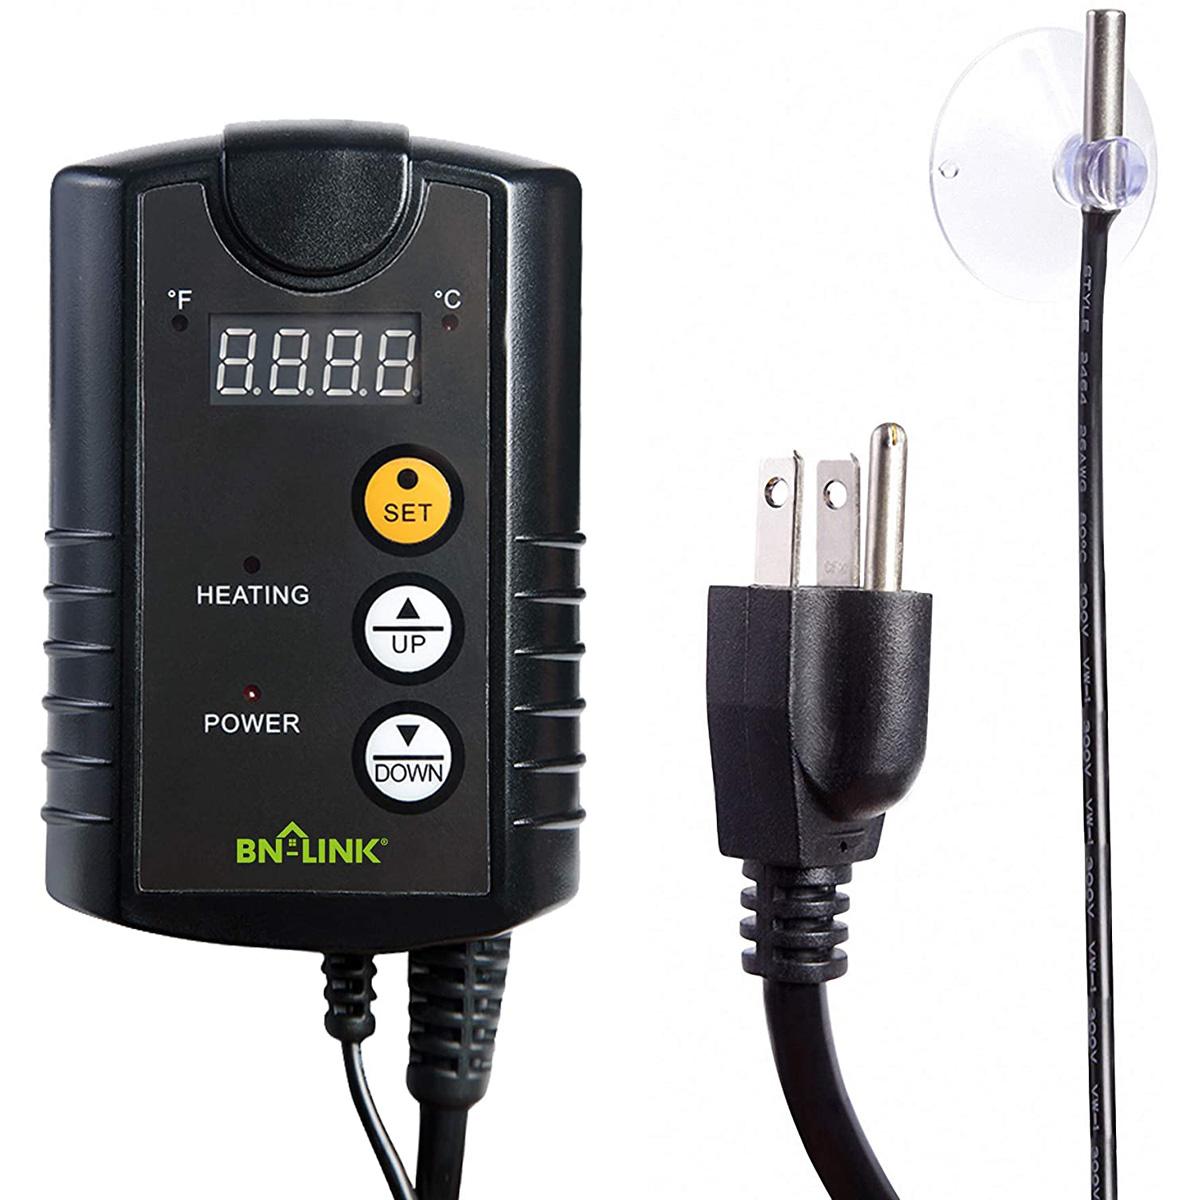 BN-LINK Digital Heat Mat Thermostat Controller for Seed Germination for $15.19